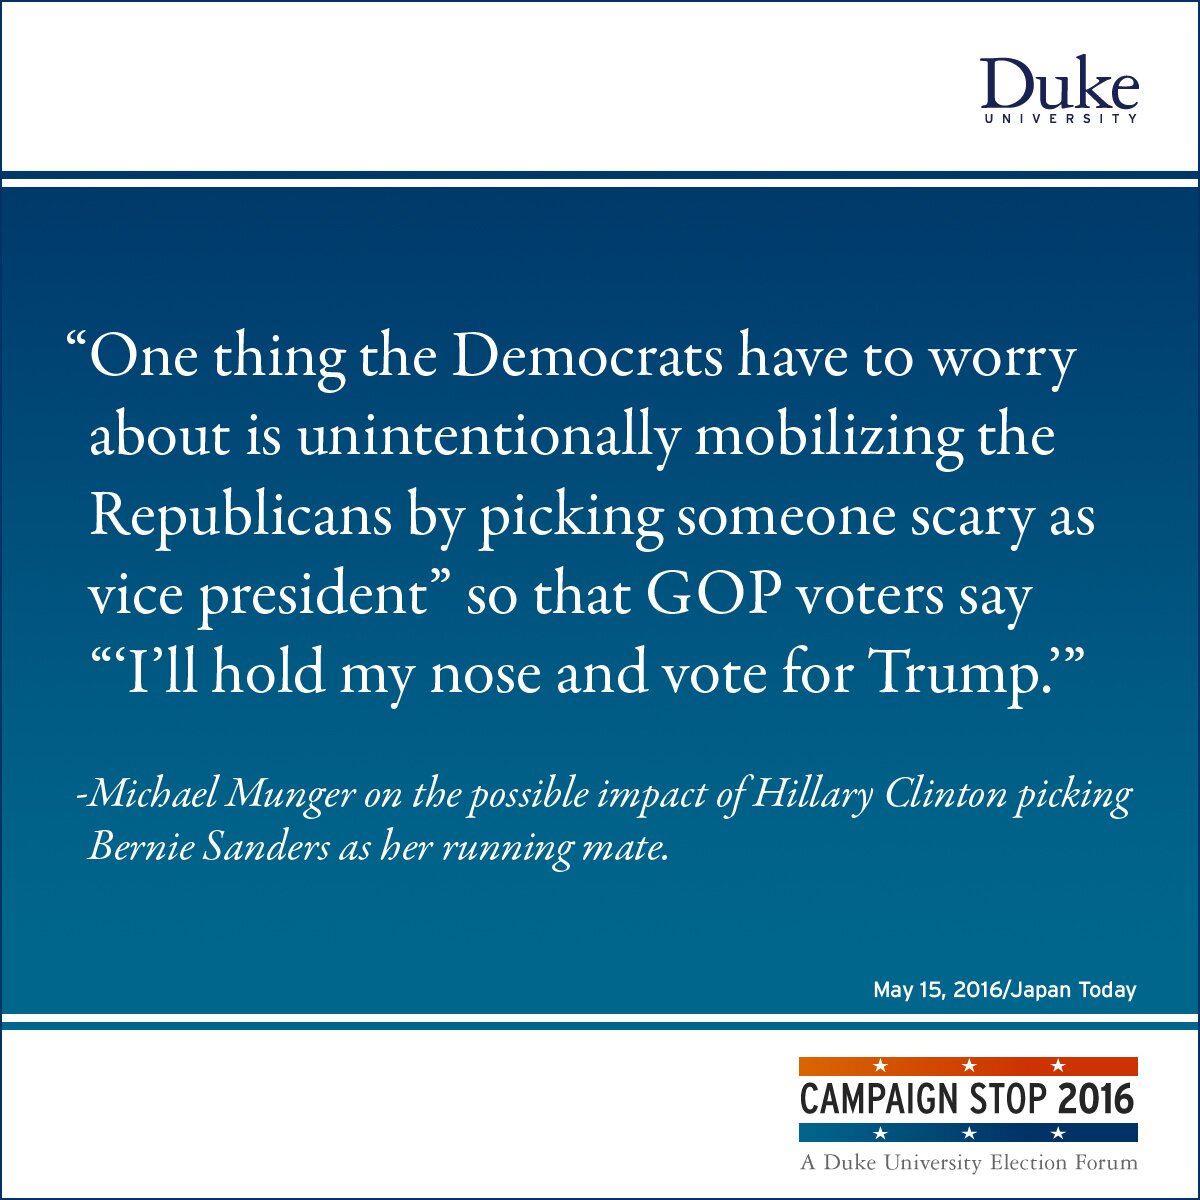 “One thing the Democrats have to worry about is unintentionally mobilizing the Republicans by picking someone scary as vice president” so that GOP voters say “‘I’ll hold my nose and vote for Trump.’” -Michael Munger on the possible impact of Hillary Clinton picking Bernie Sanders as her running mate.